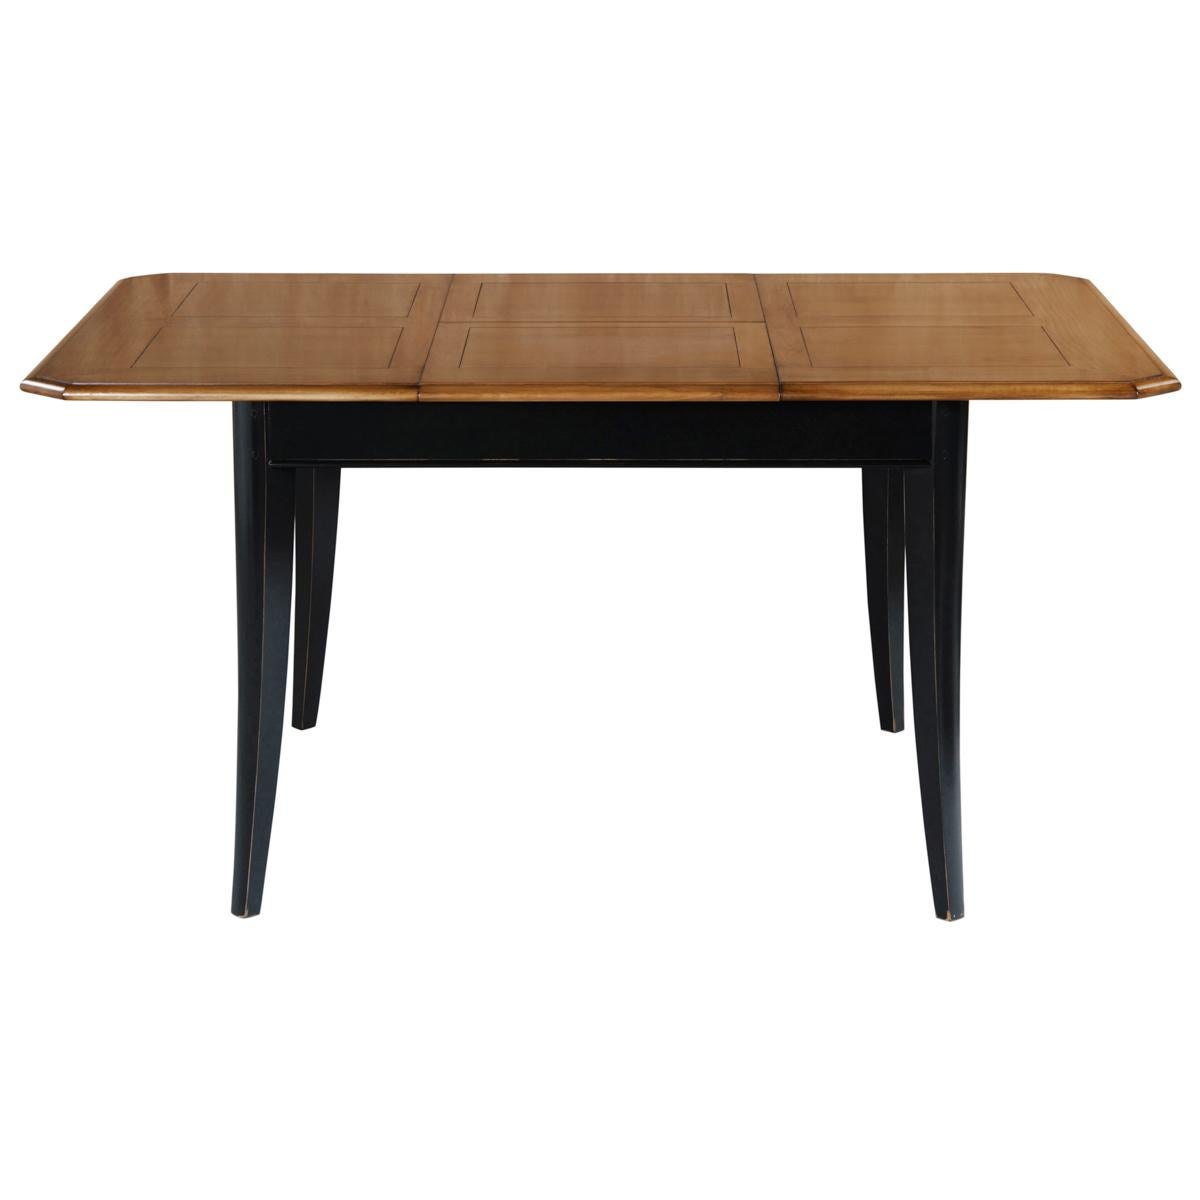 Neoclassical French Tradition Extensible Square Dining Table, Smoked Cherry & Black Laquered For Sale